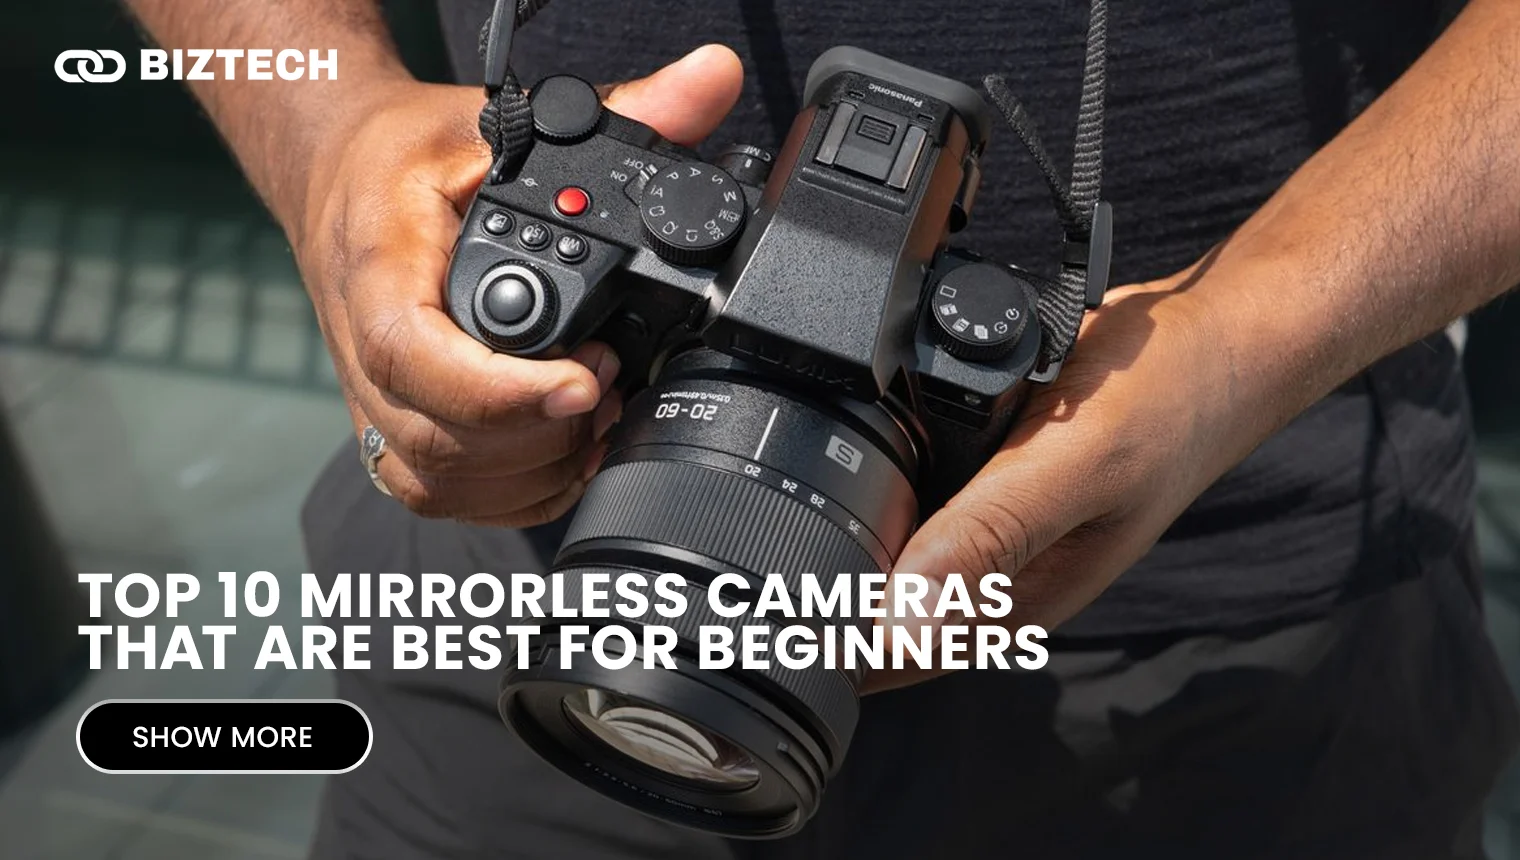 Top 10 Mirrorless Cameras That Are Best for Beginners